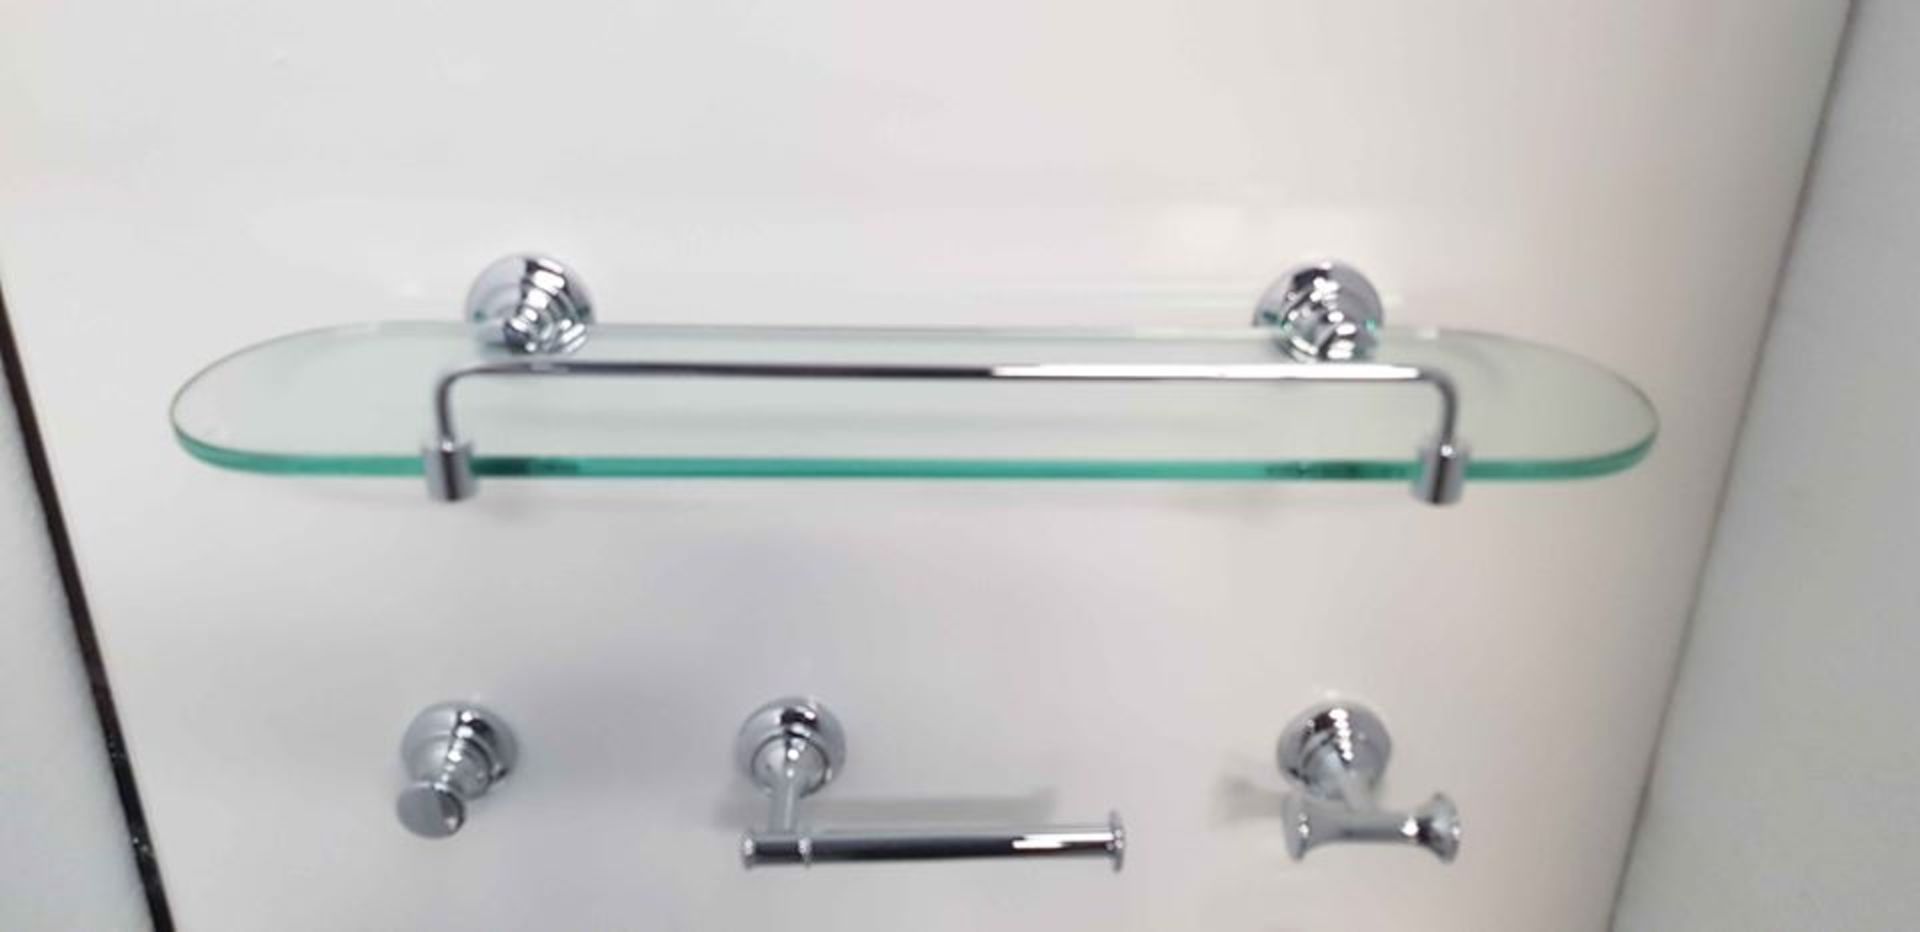 Transition 12 Piece, very high quality, bathroom accessory set in polished chrome & ceramic finish. - Image 3 of 5